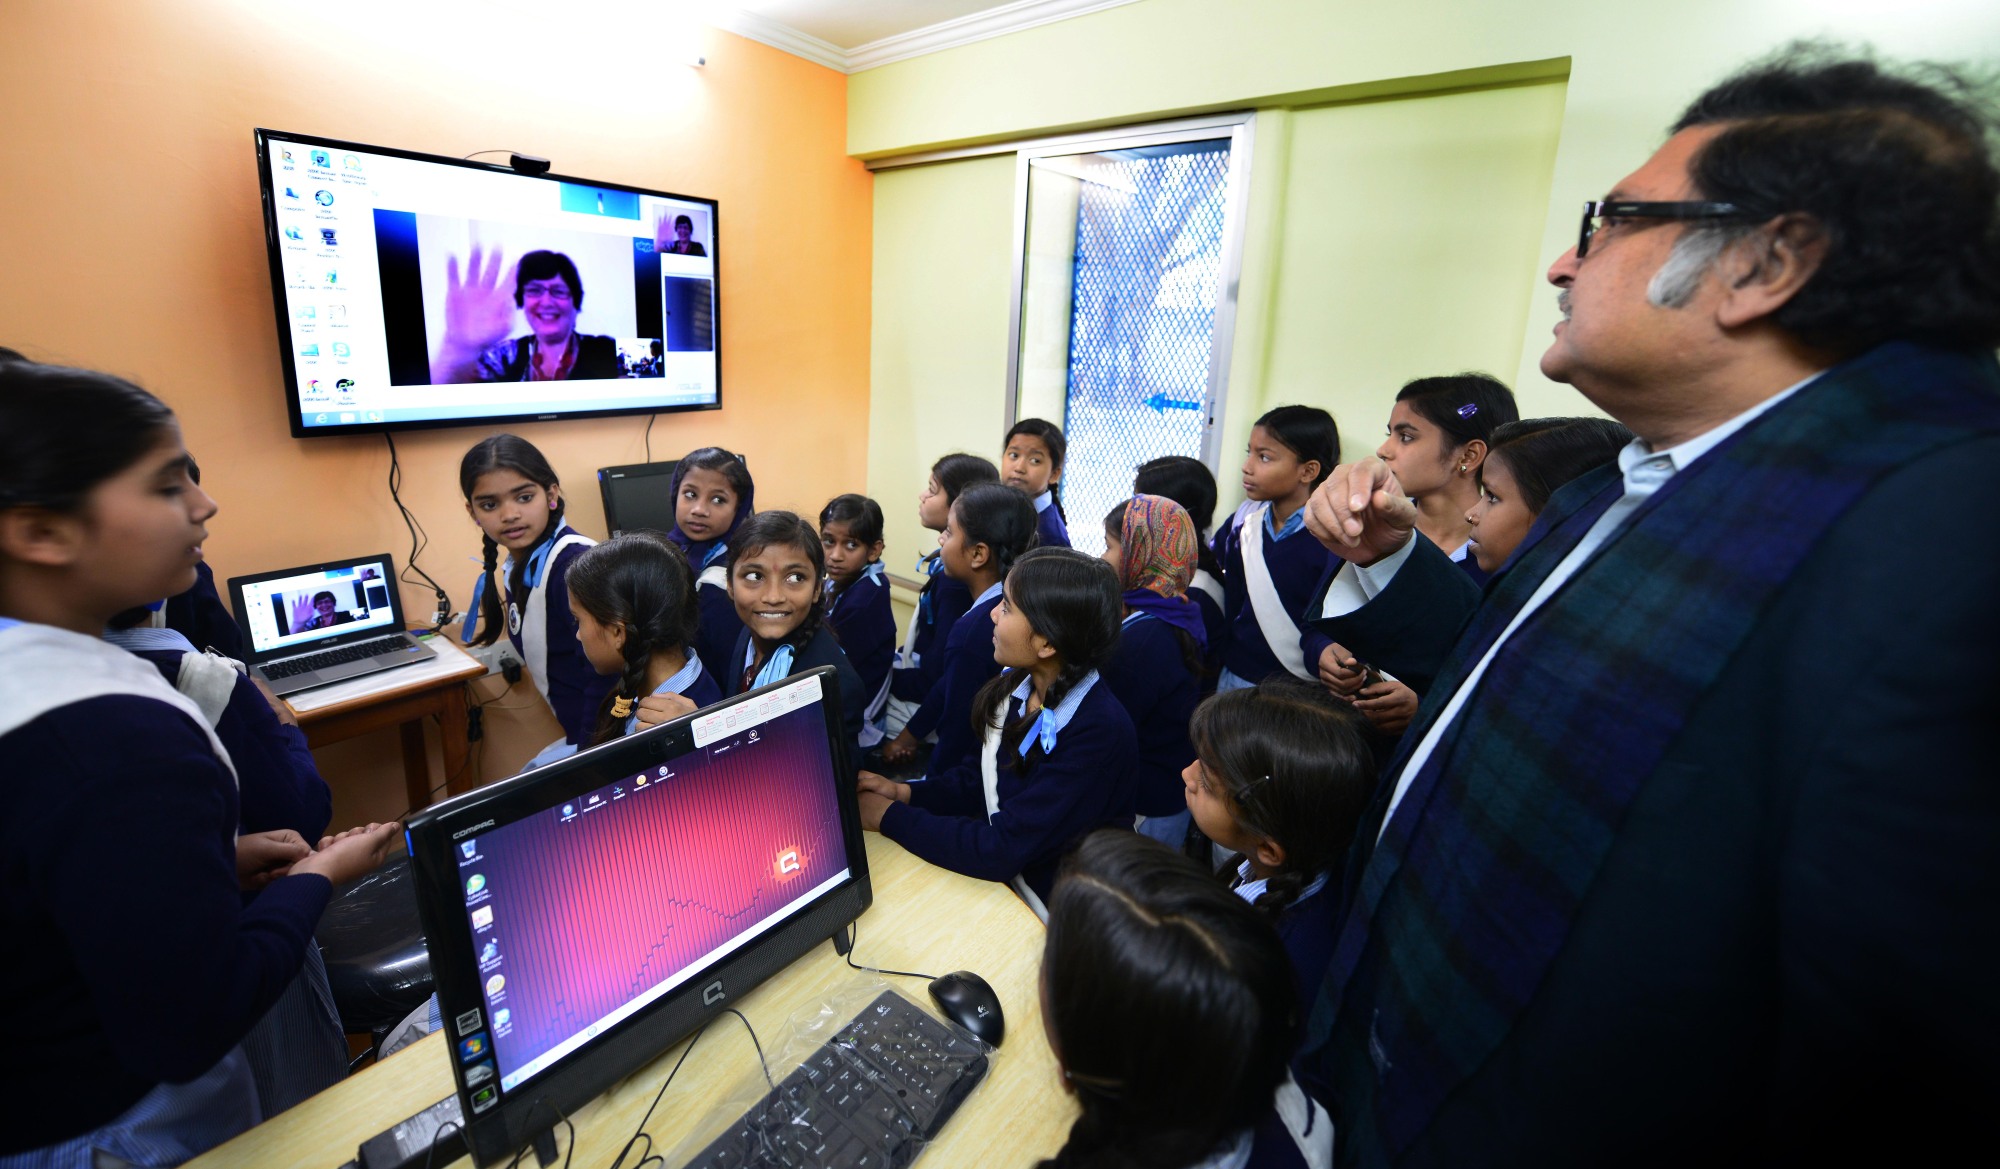 Sugata Mitra, standing at right, visits his "School in the Cloud" in New Delhi in 2014. On screen, a member of the "granny net" is the only adult supervision.